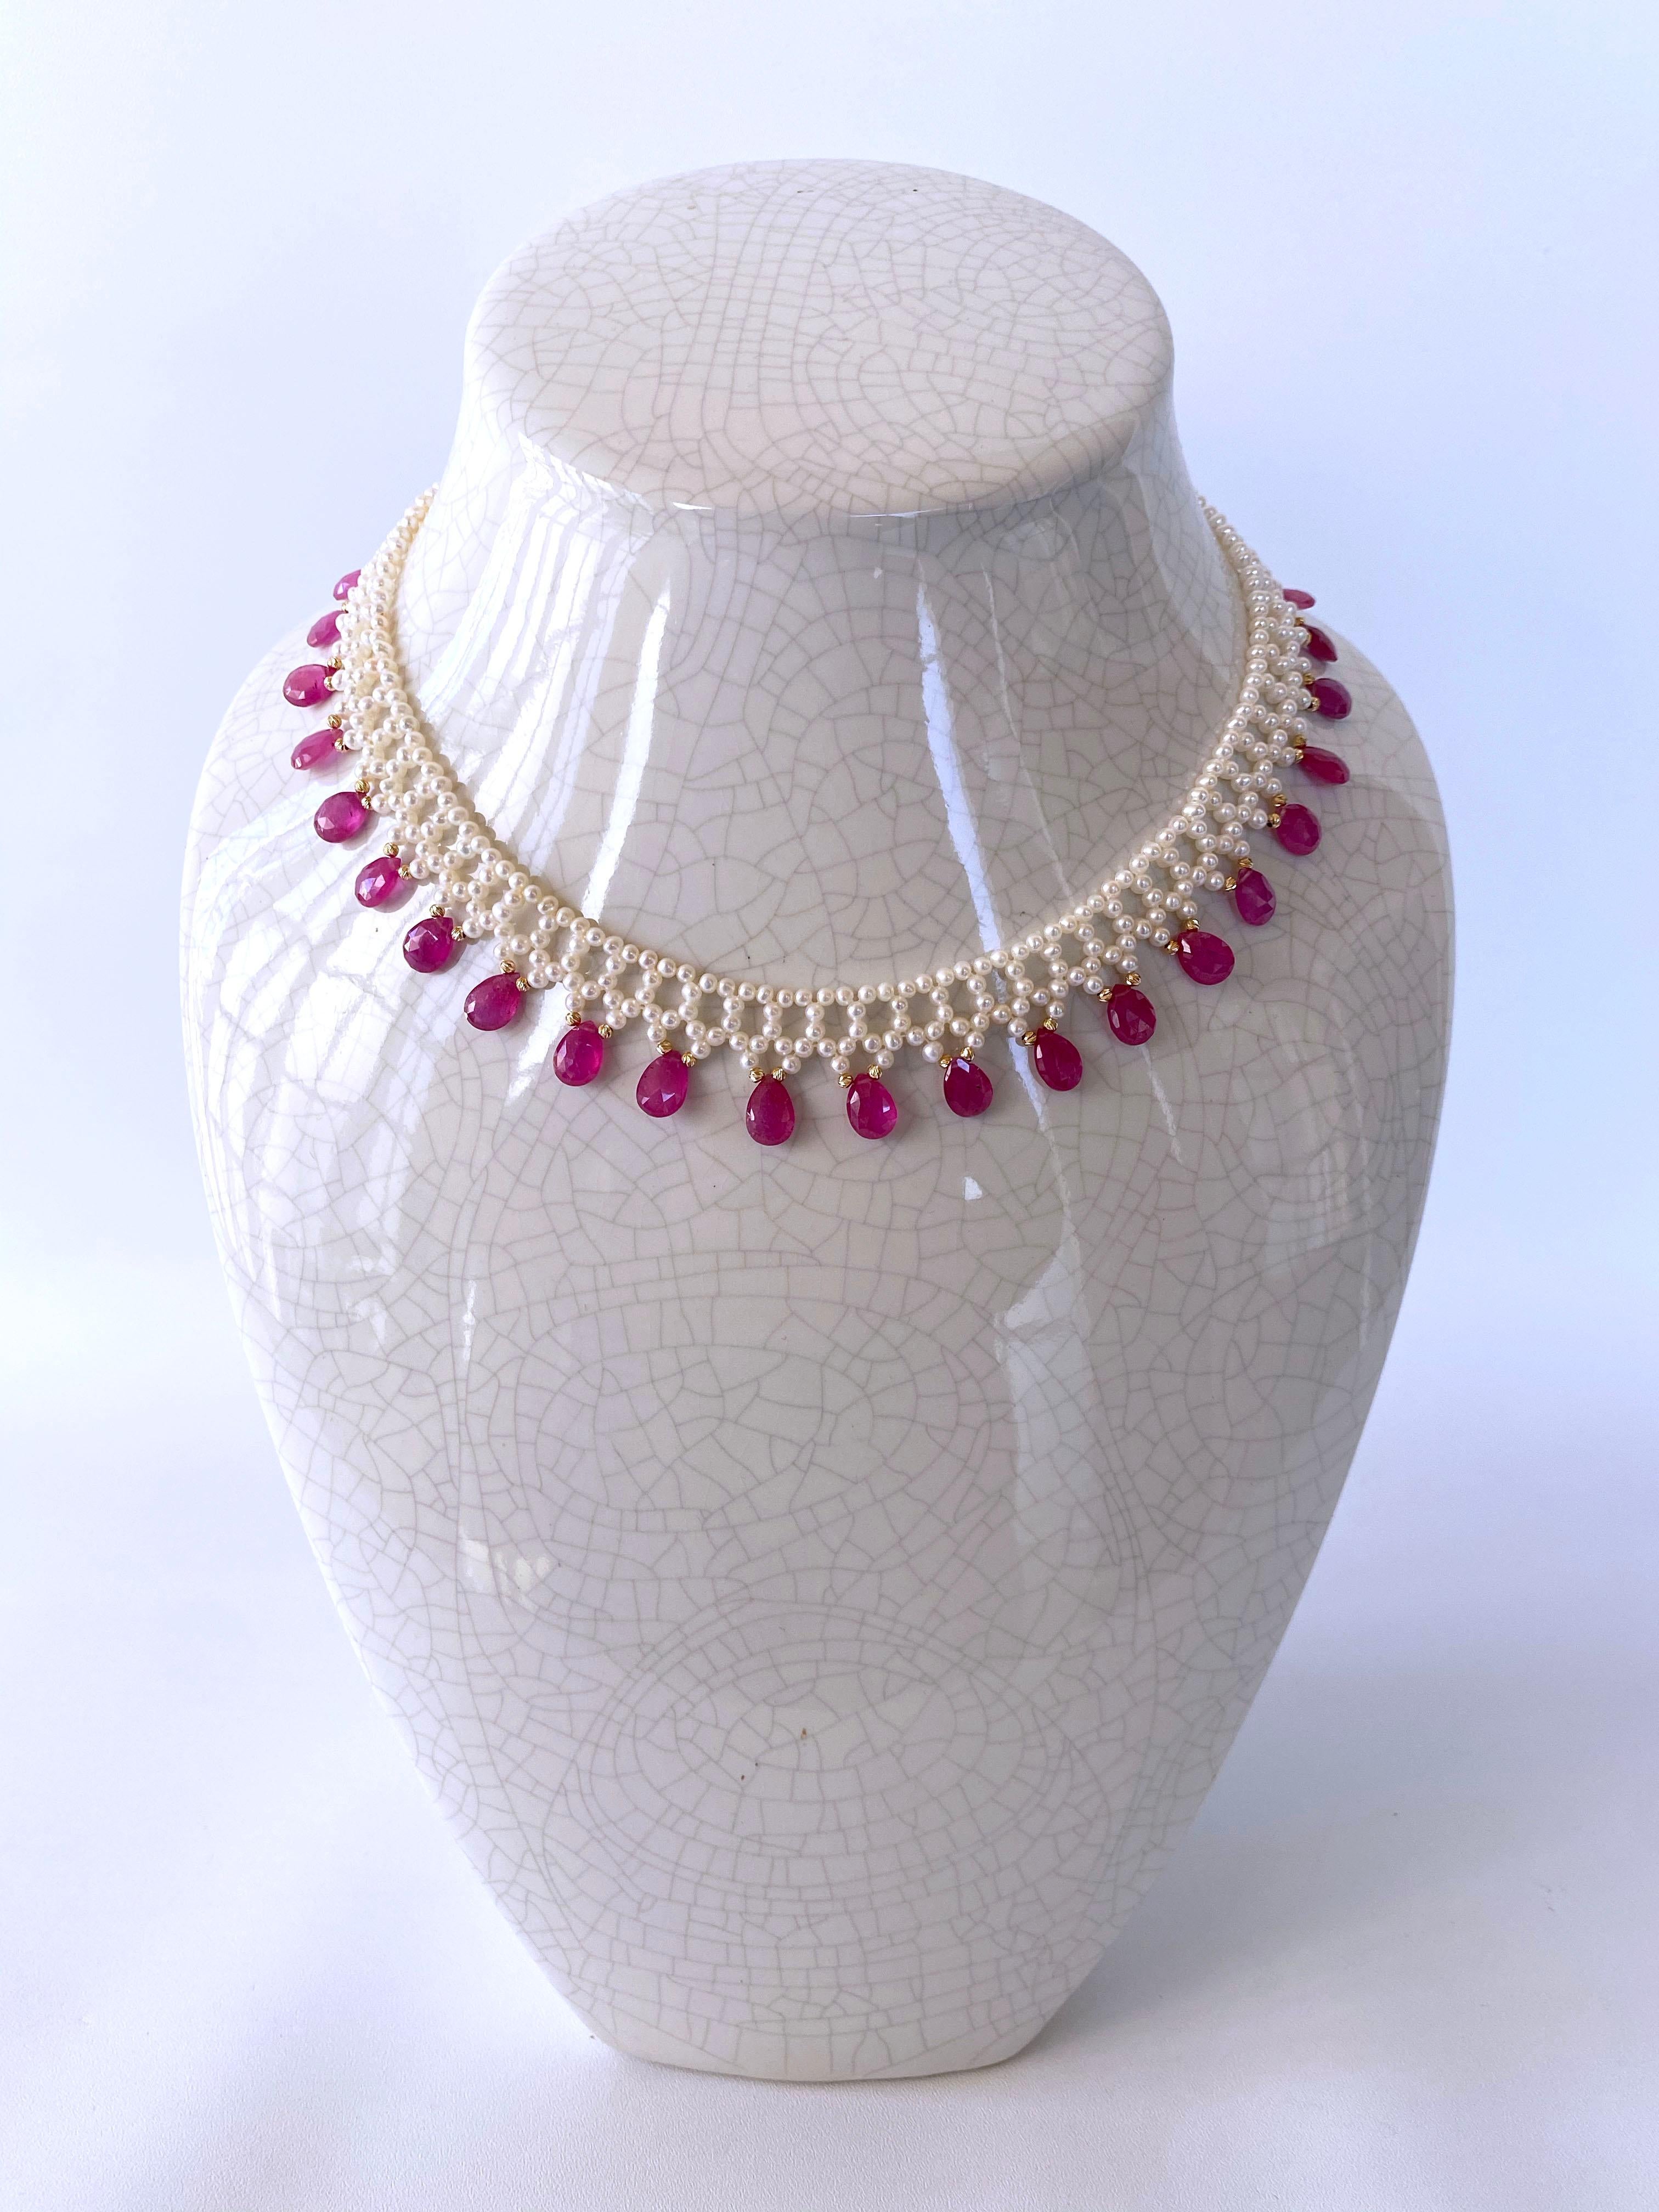 Gorgeous hand woven Pearl necklace by Marina J. This lovely piece features beautiful high luster White Pearls that have a wonderful iridescent shine woven into a fine lace like design. Gorgeous translucent Pink Sapphire briolettes adorn this